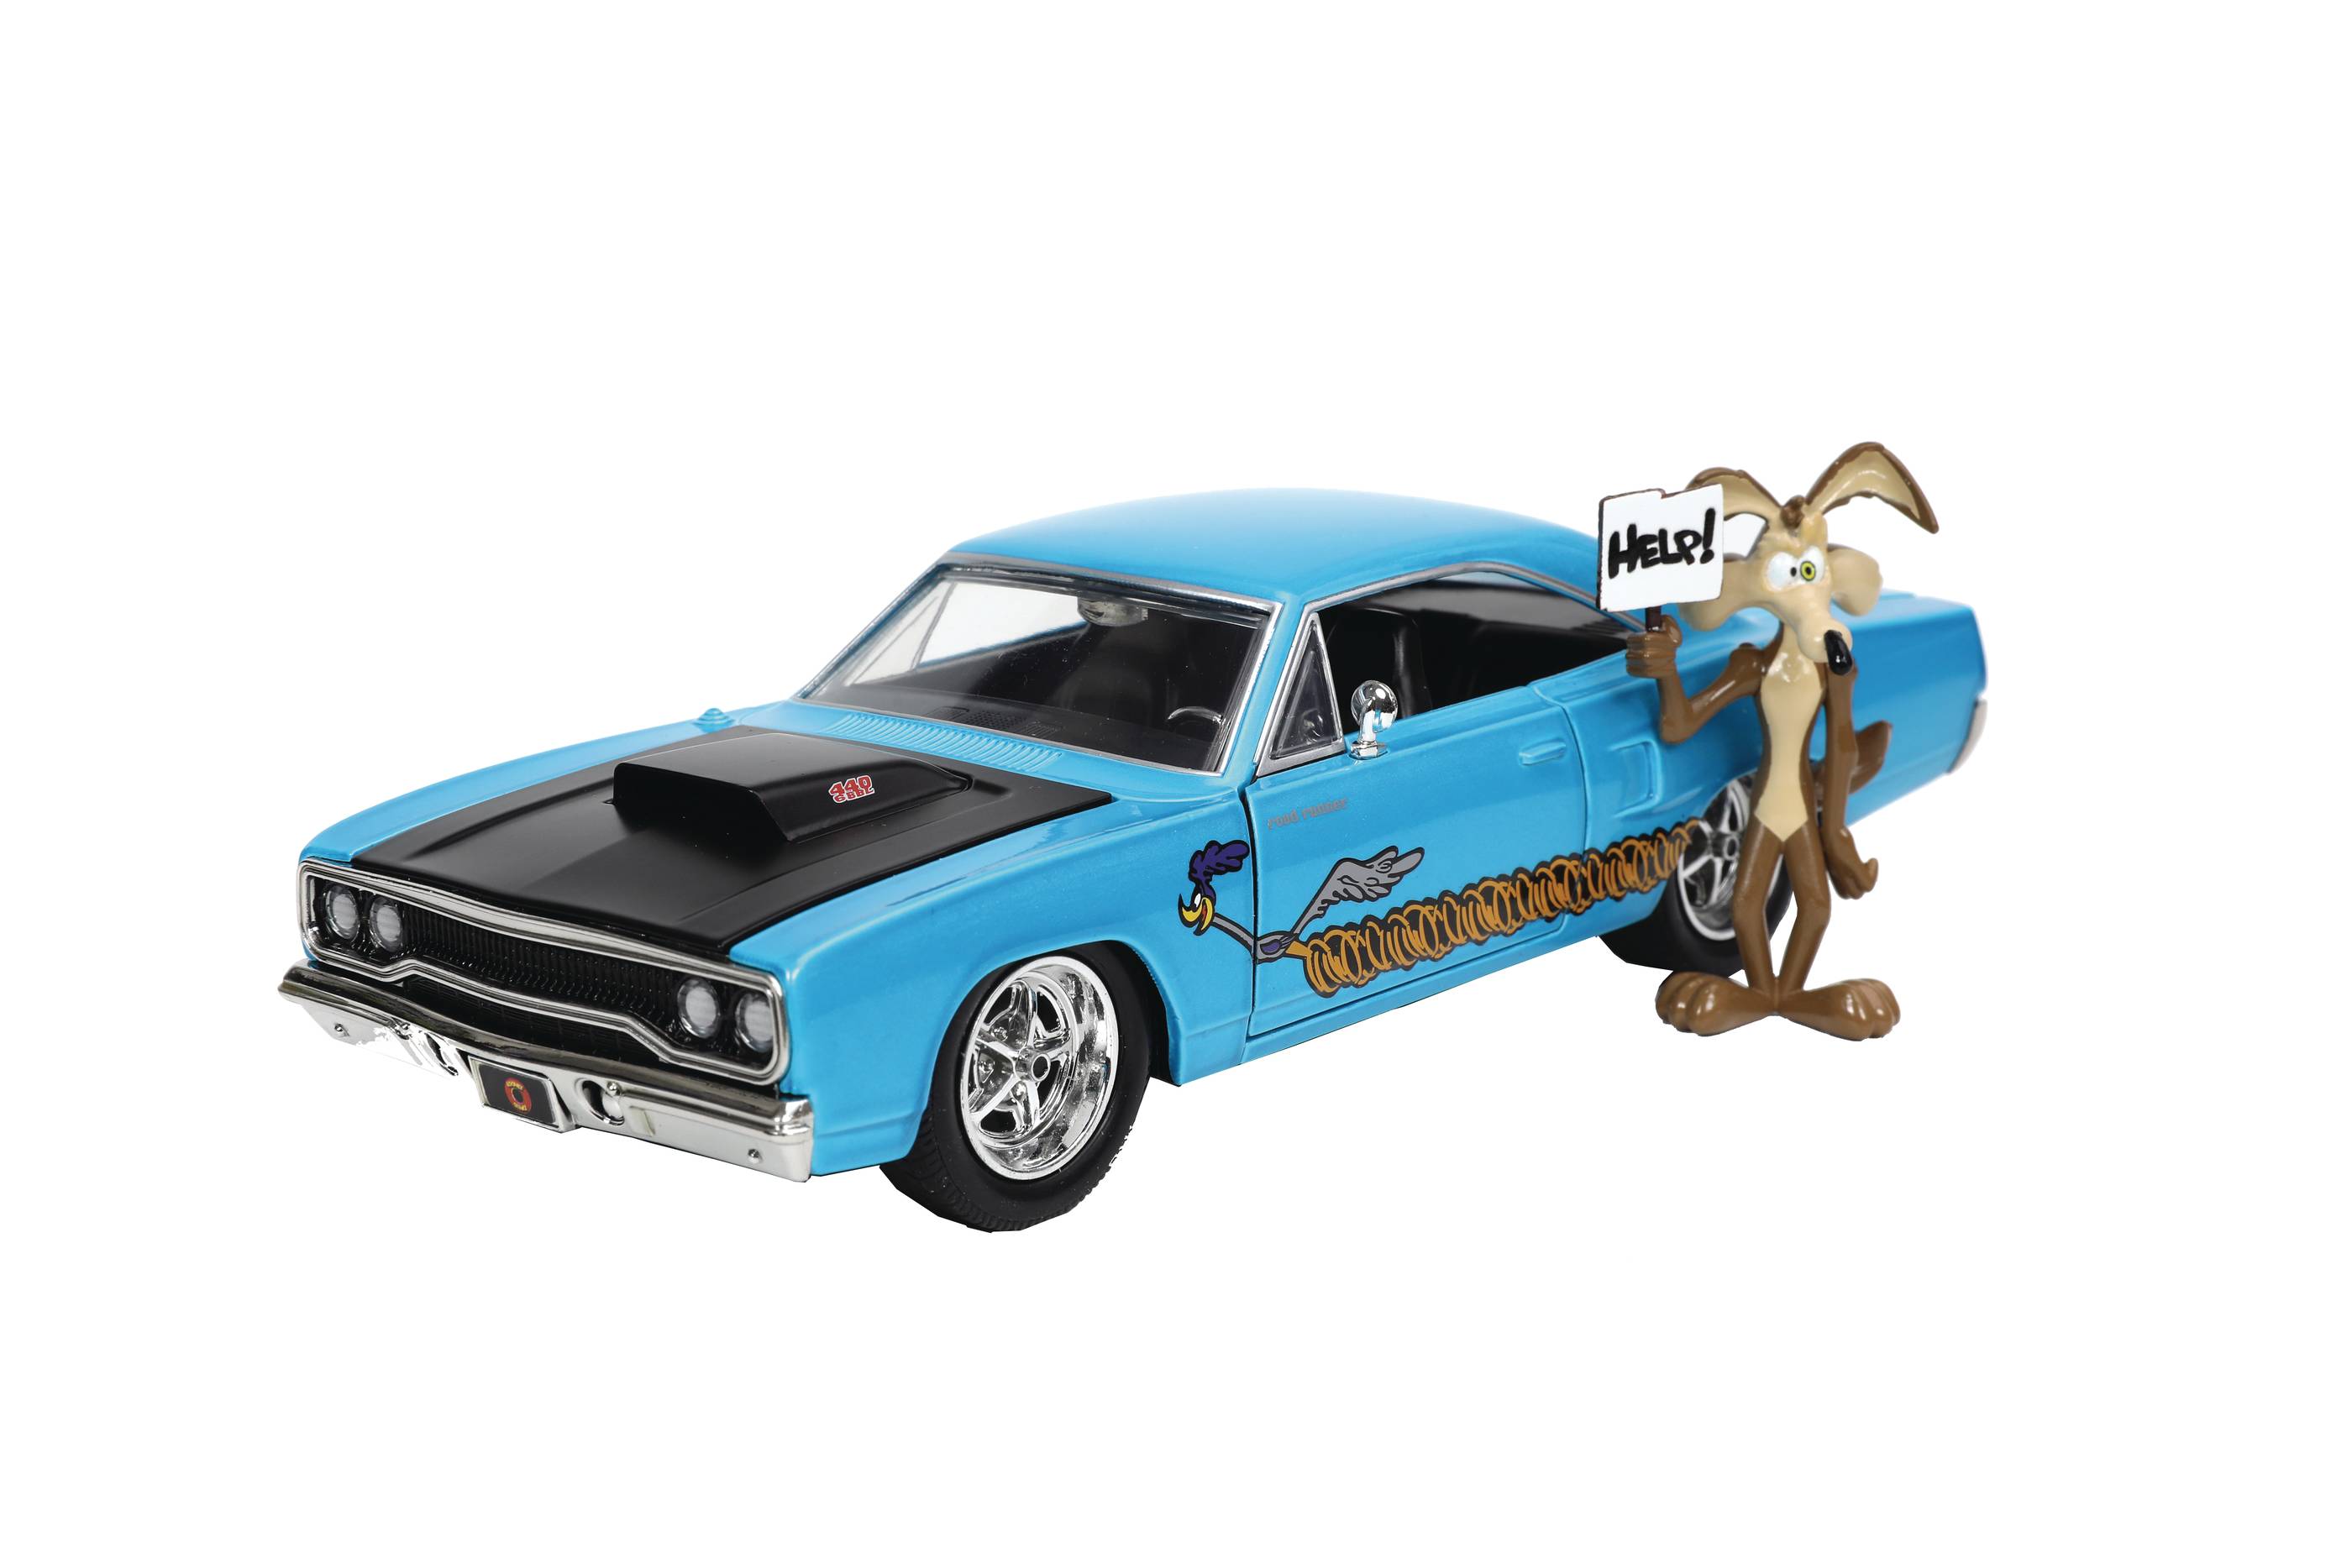 HWR 70 PLYMOUTH ROAD RUNNER/WILE E COYOTE 1/24 DIE-CAST VEH